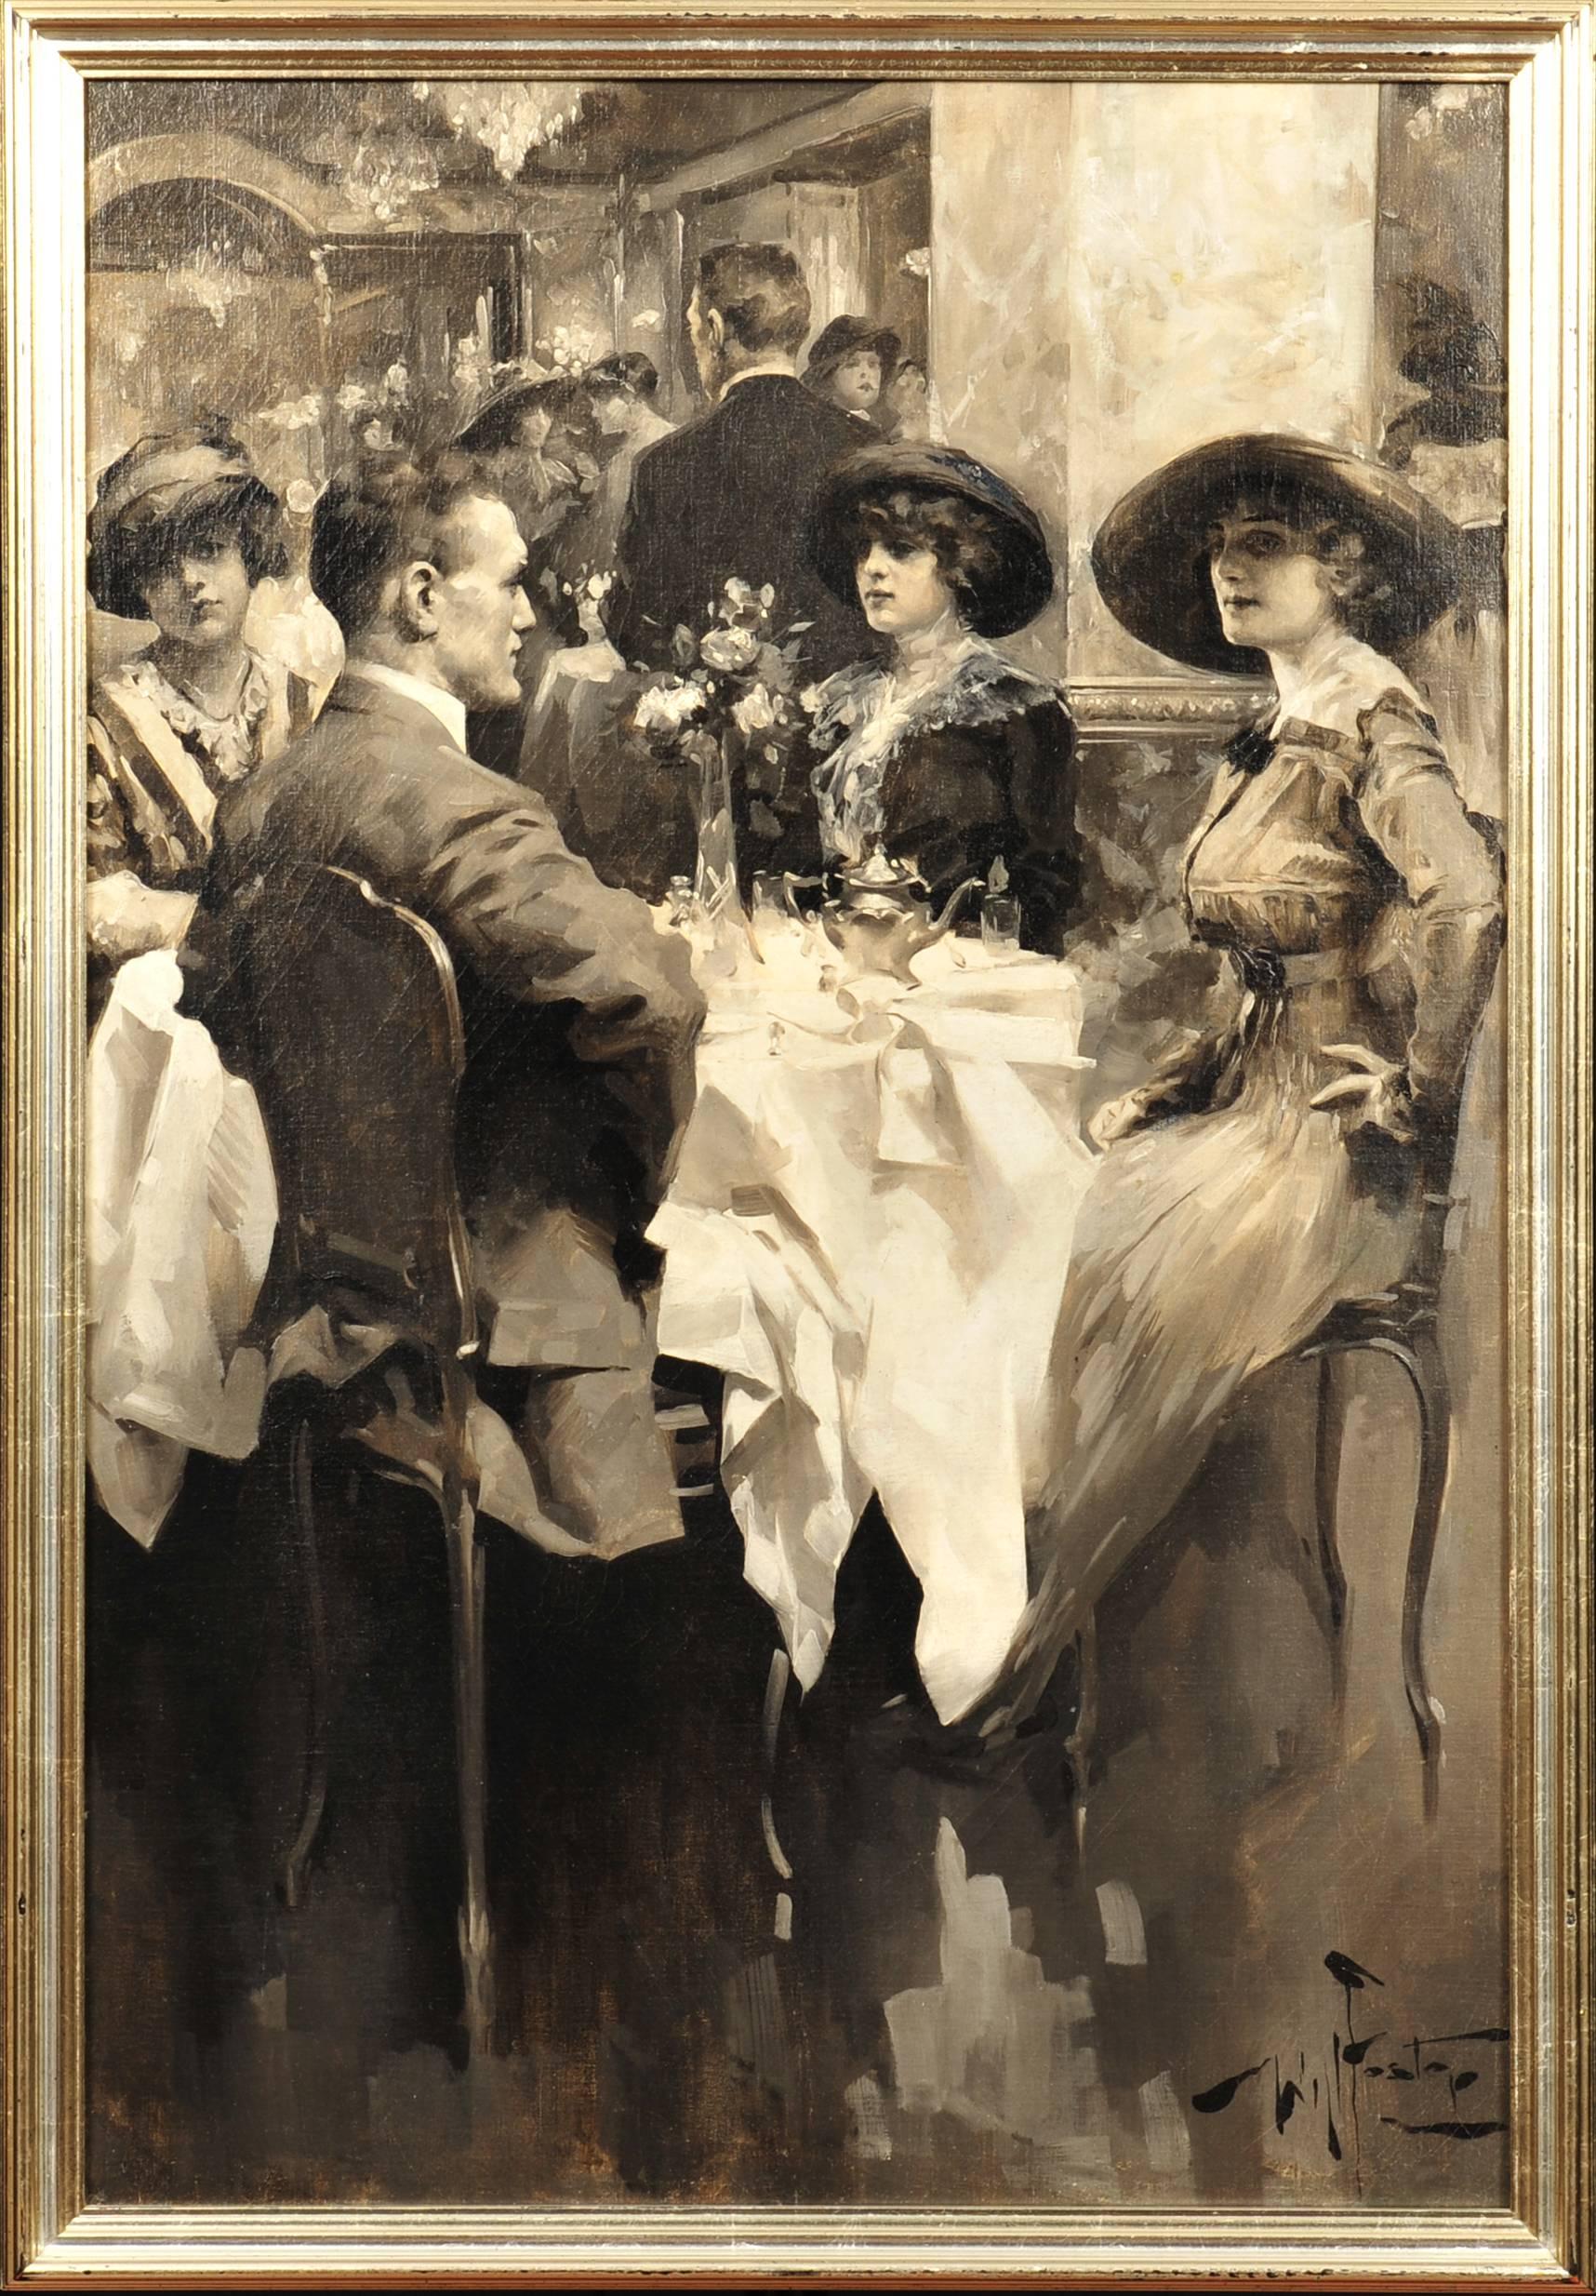 Untitled, Harper's Monthly 1917 - Painting by William Frederick Foster